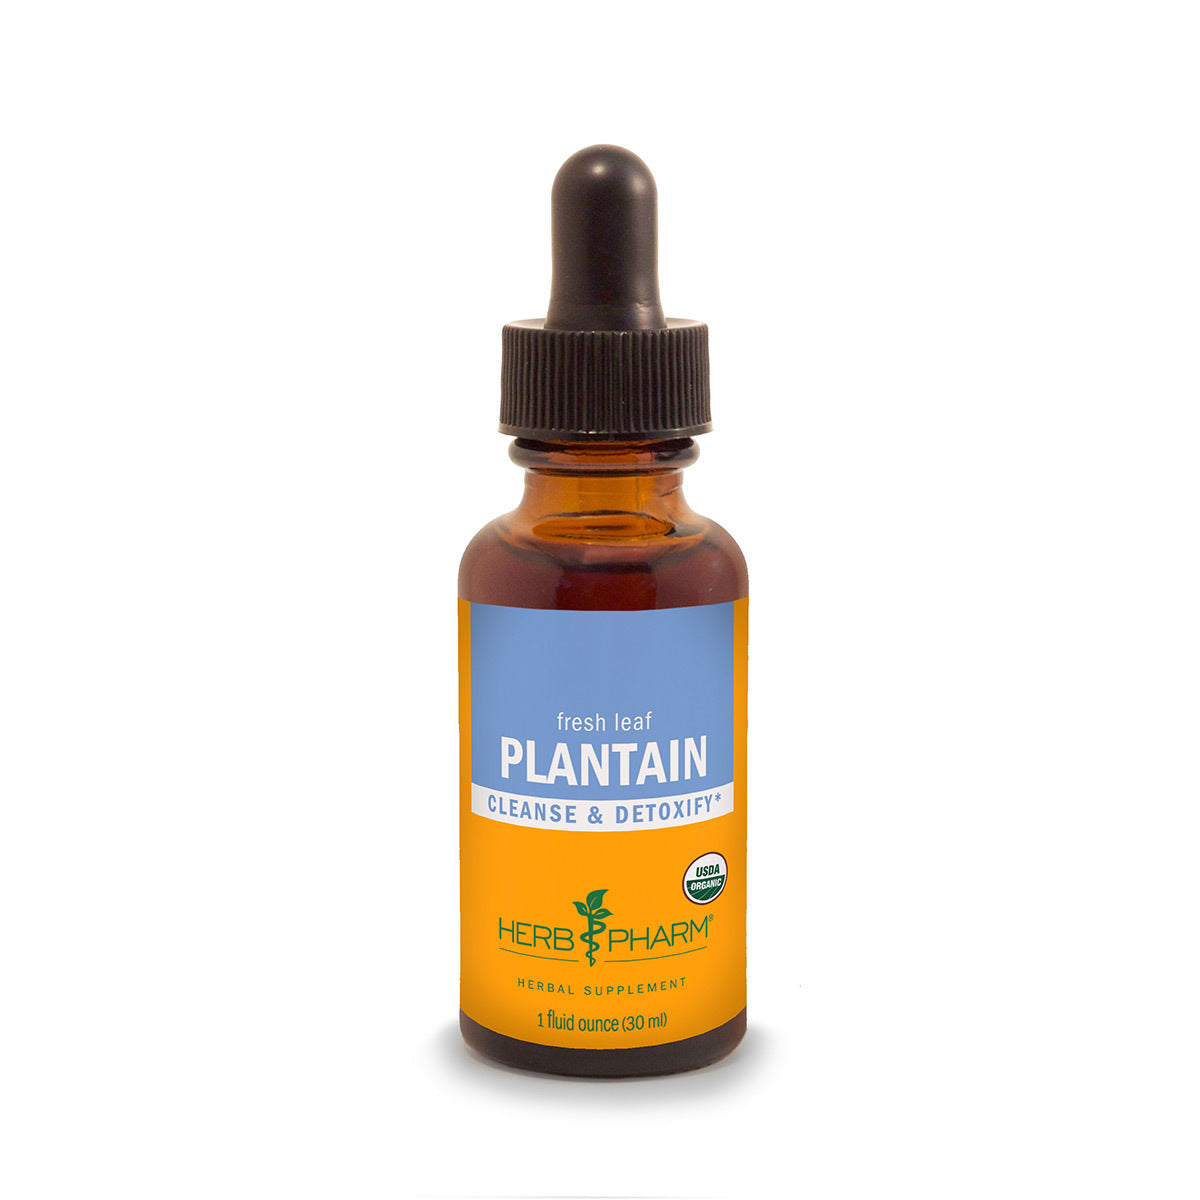 Primary image of Plantain Extract